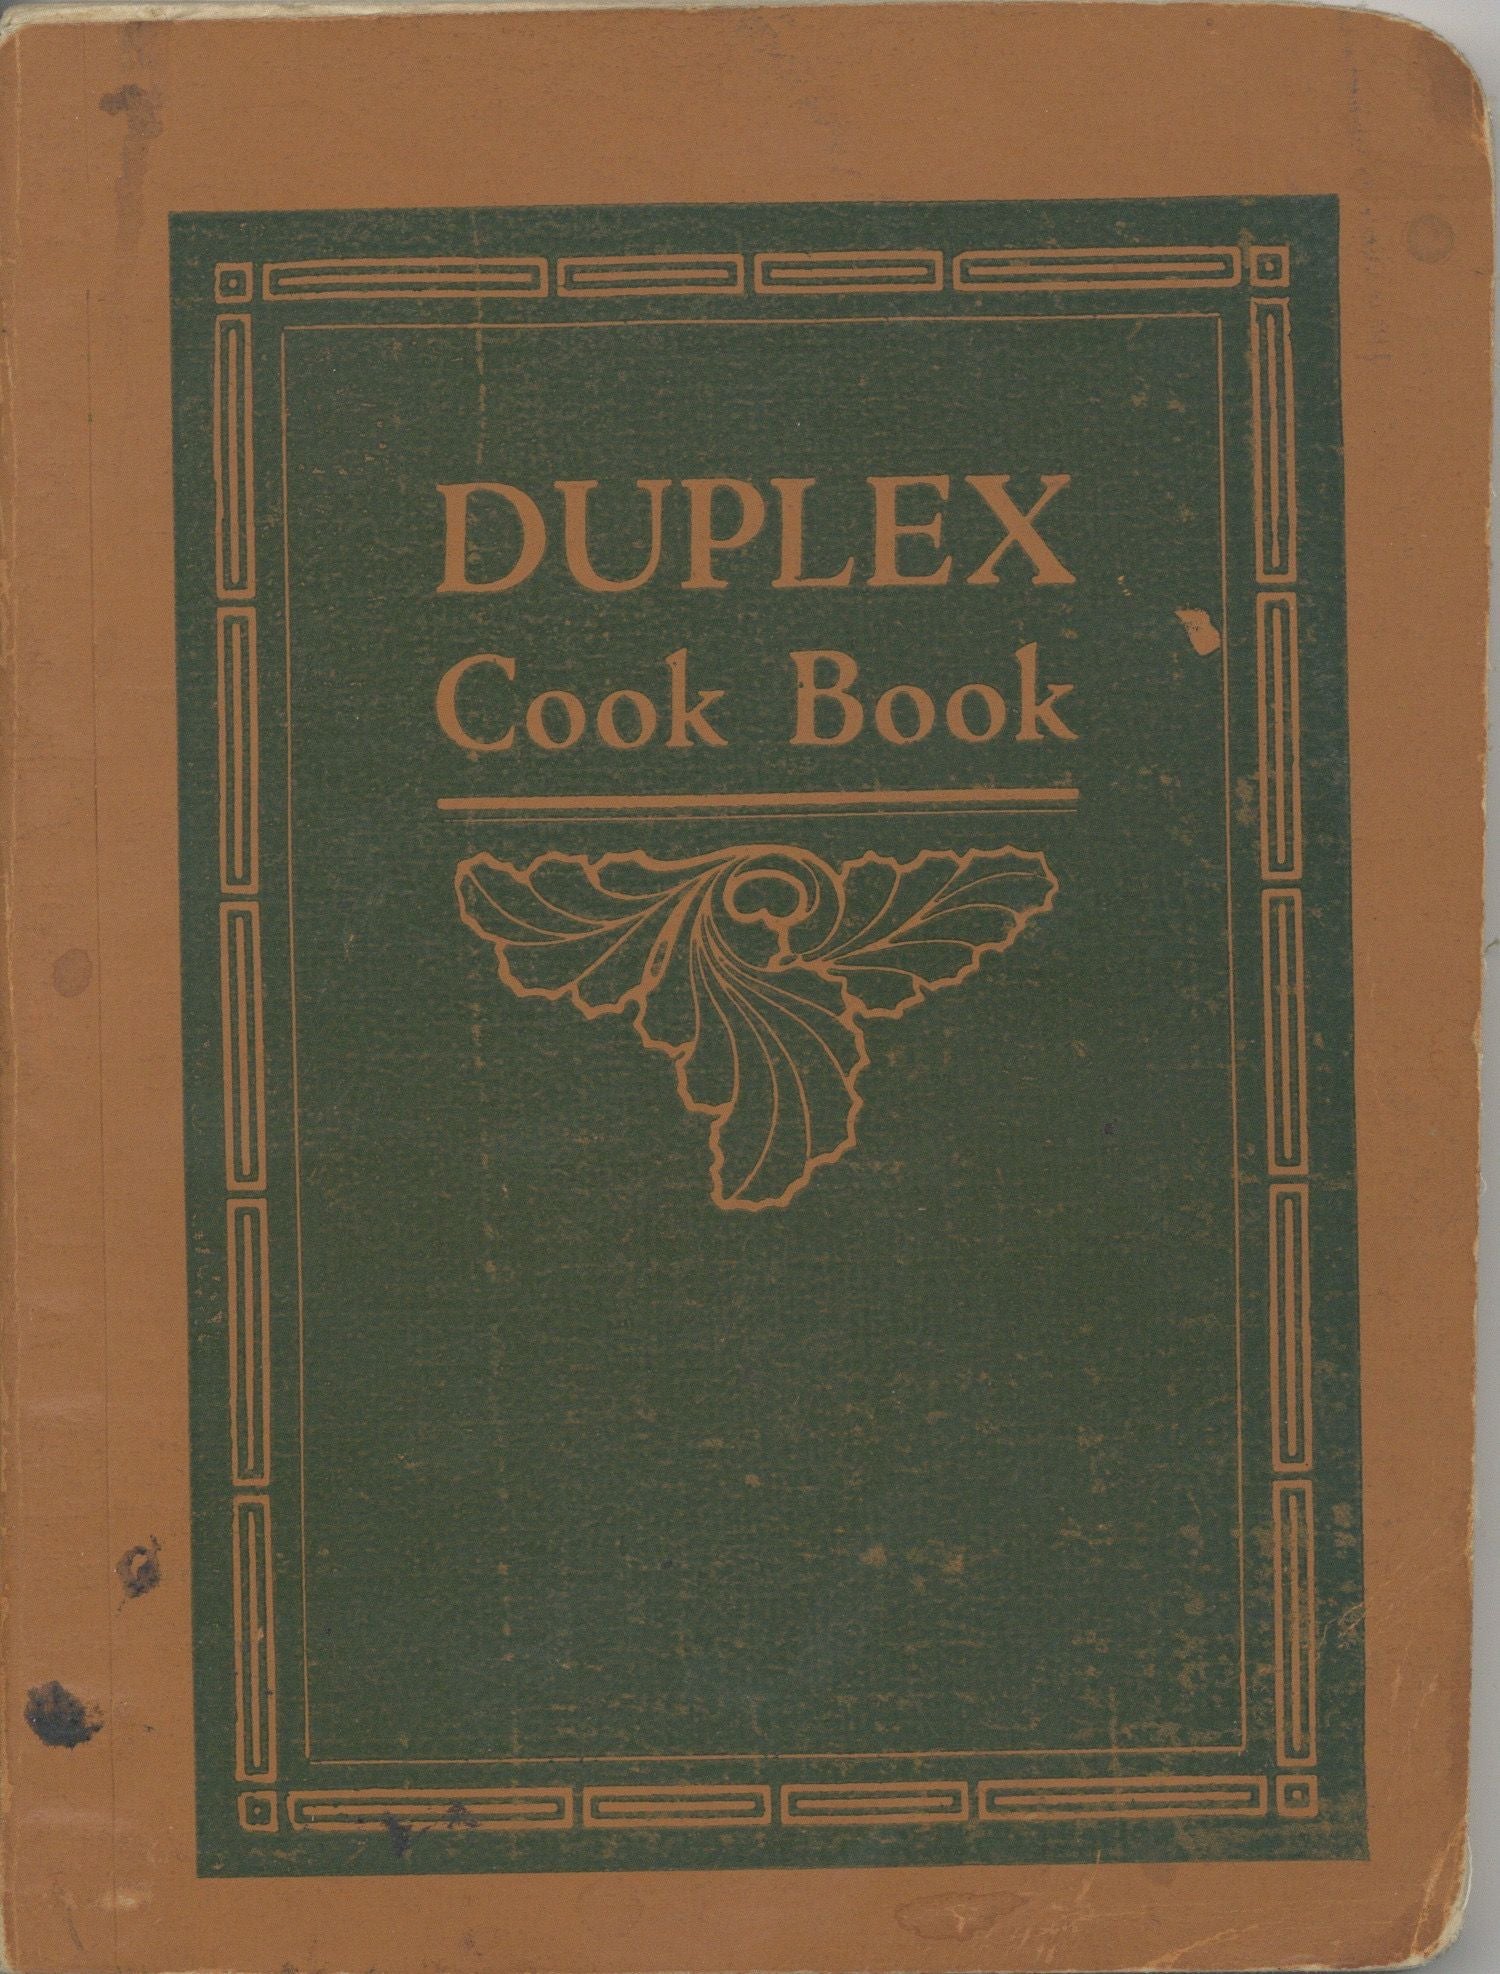 Item #4979 The Duplex Cook Book. Containing full instructions for cooking with the Duplex Fireless Stove. Durham Manufacturing Co., Ind Muncie.